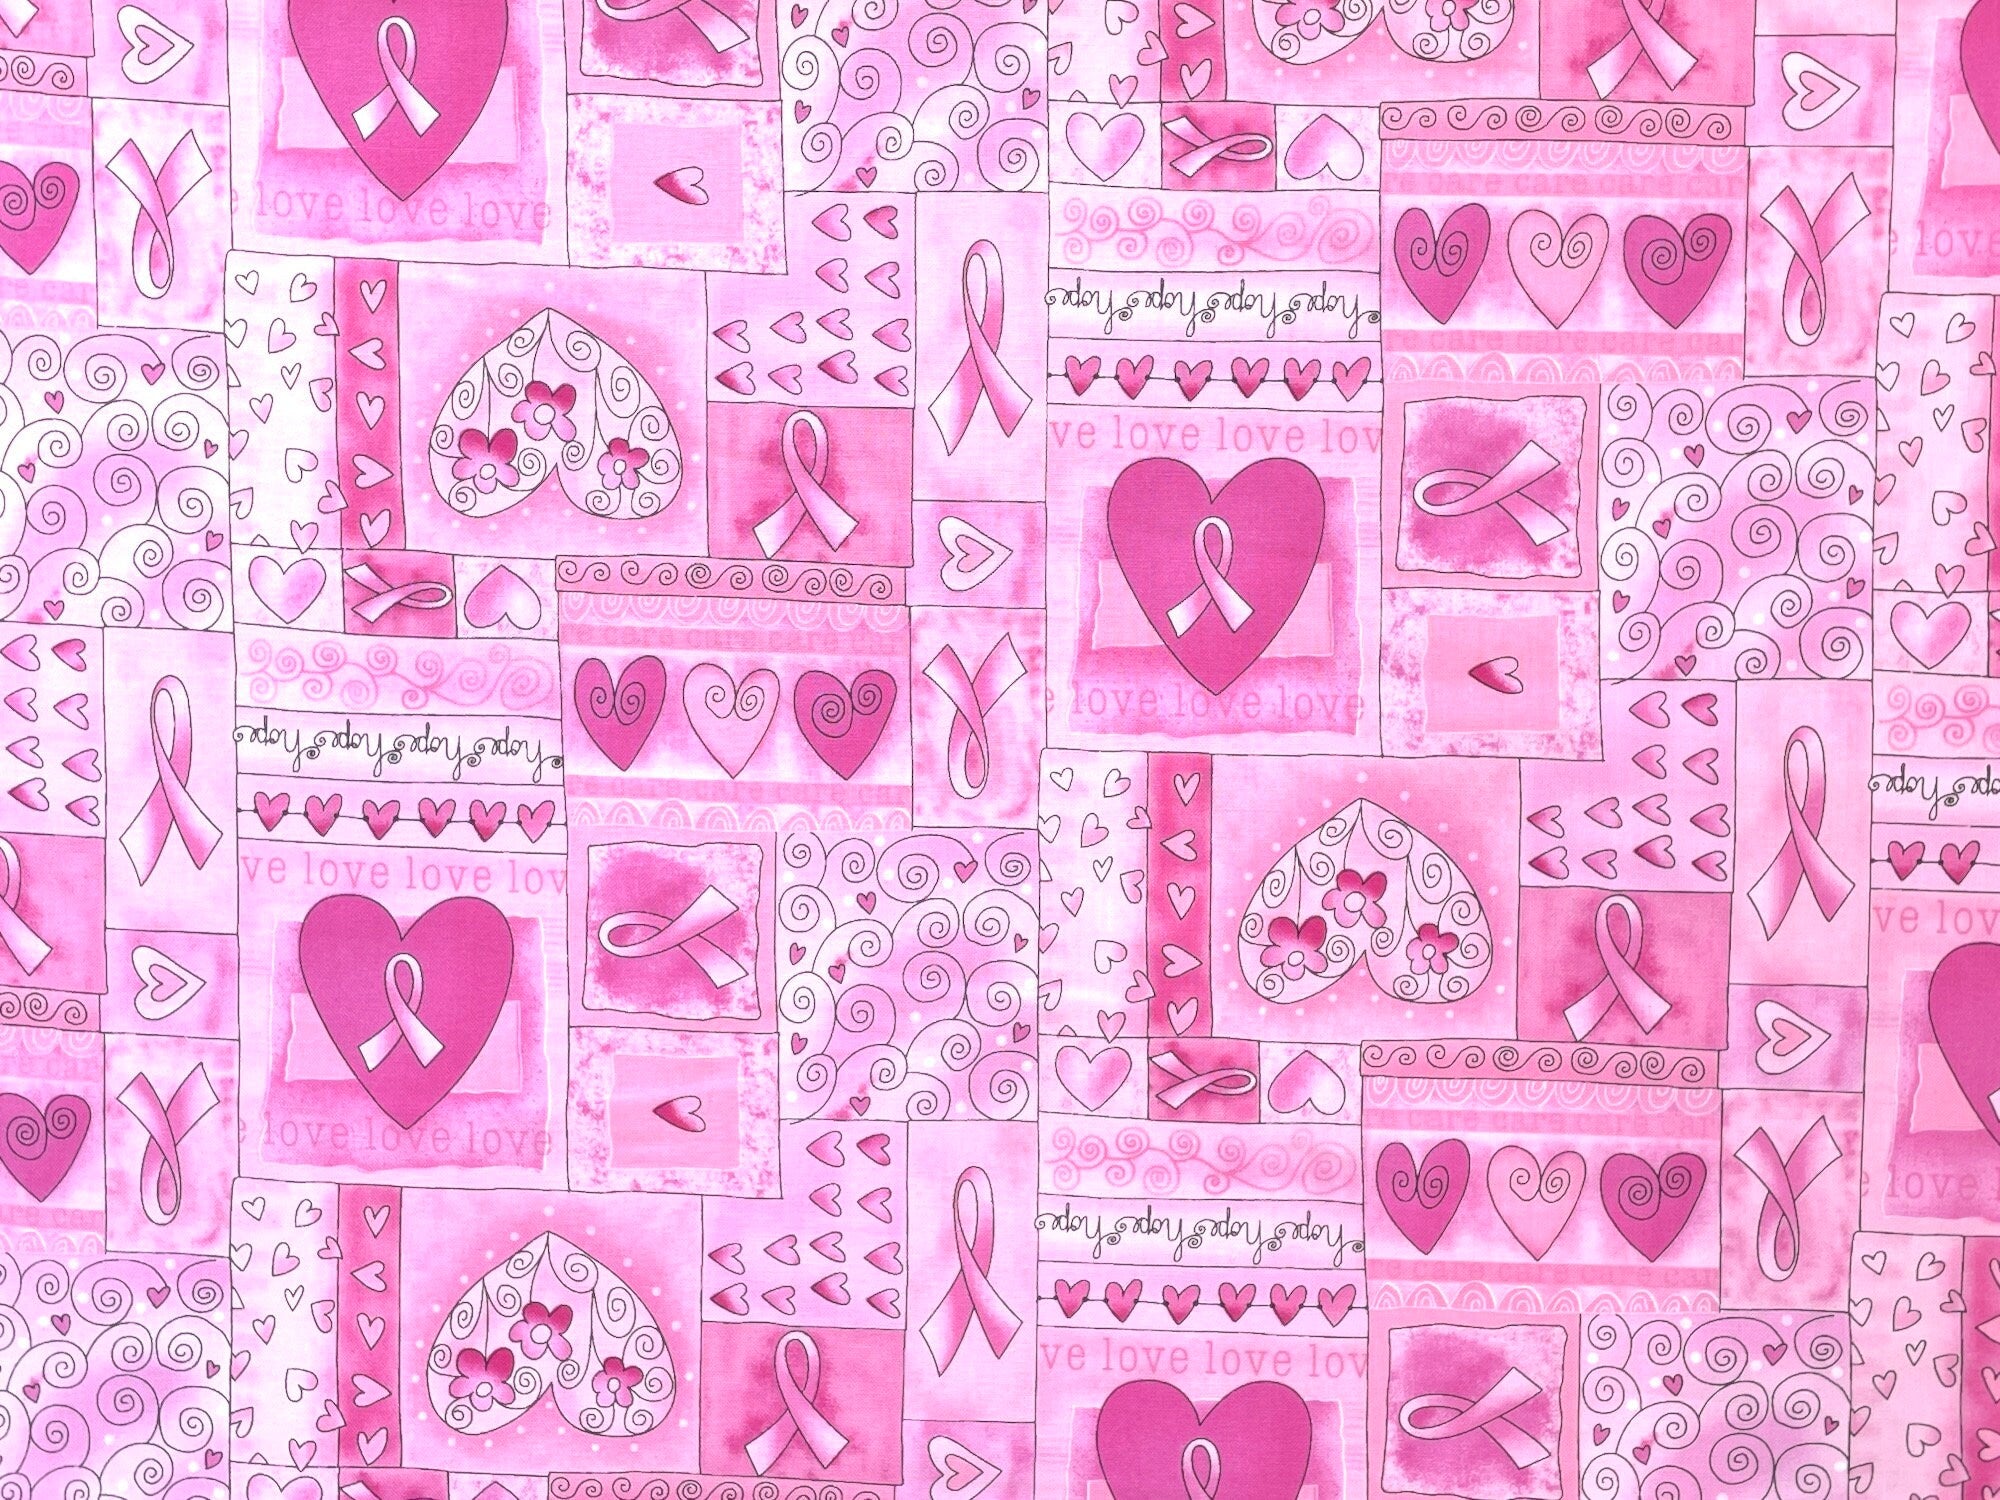 This pink awareness fabric is covered with hearts and ribbons that have various shades of pink.